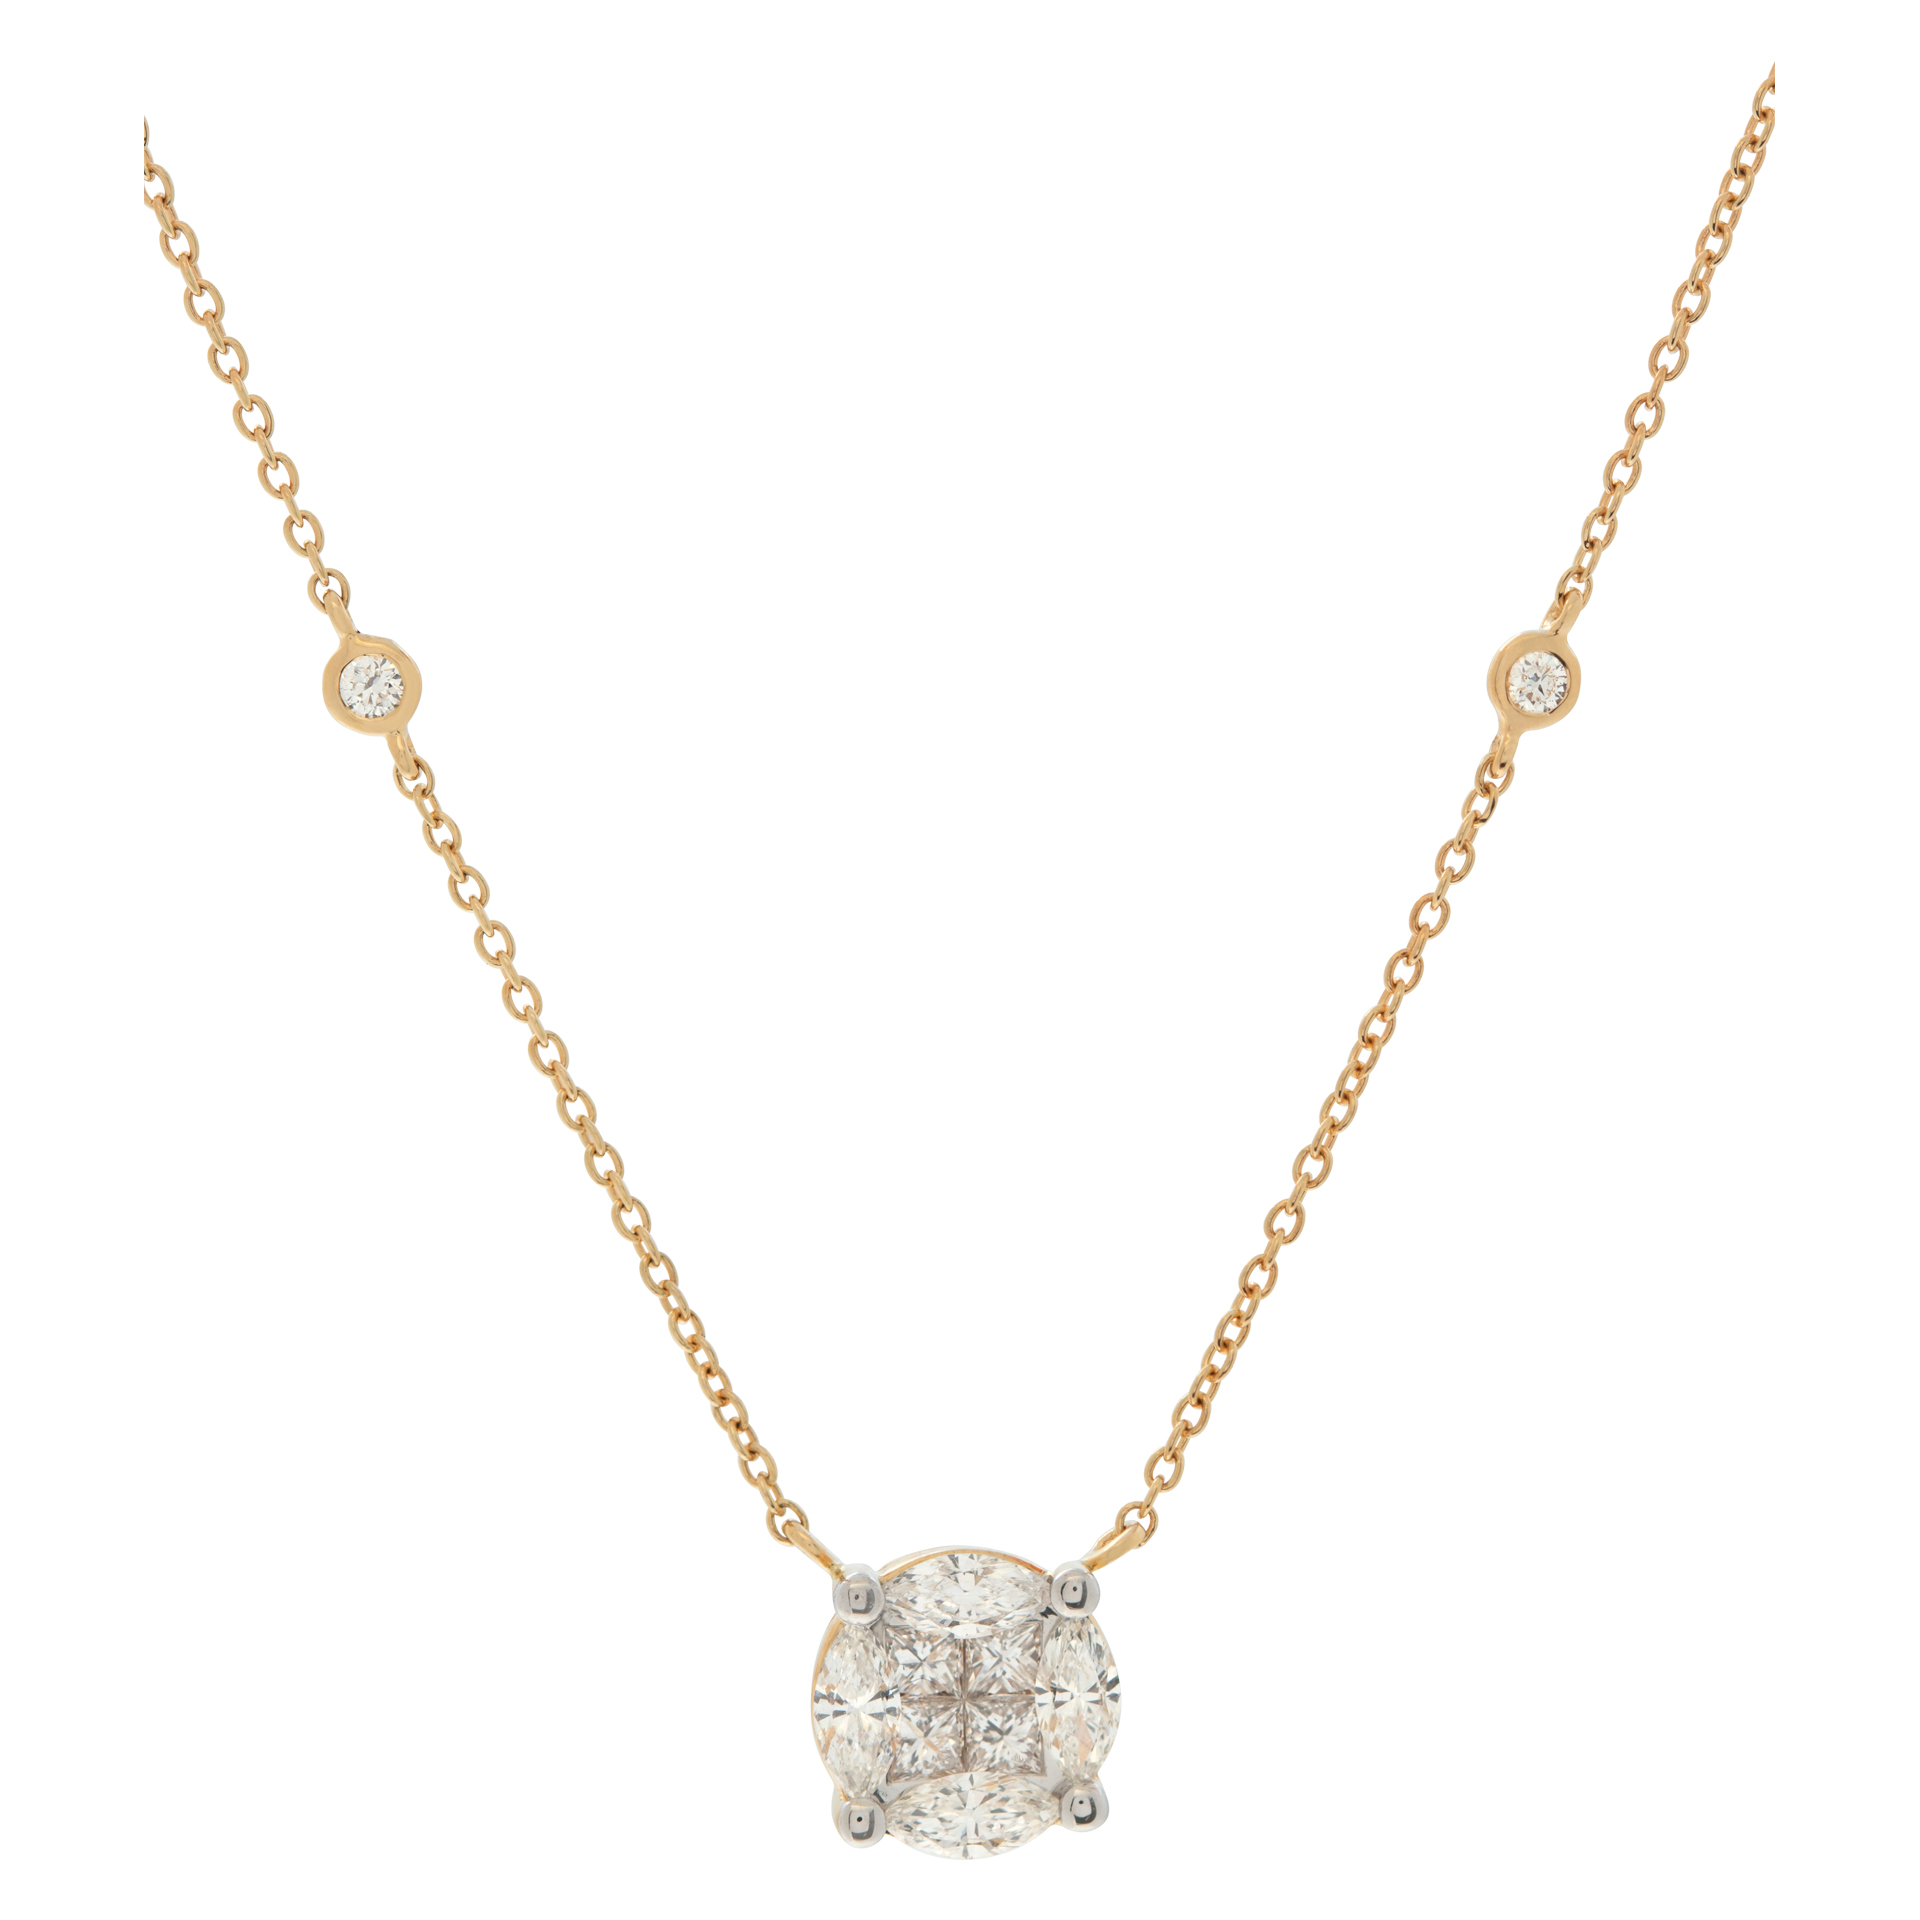 Illusion set diamond pendant necklace in 18k yellow gold with 1.14 carats